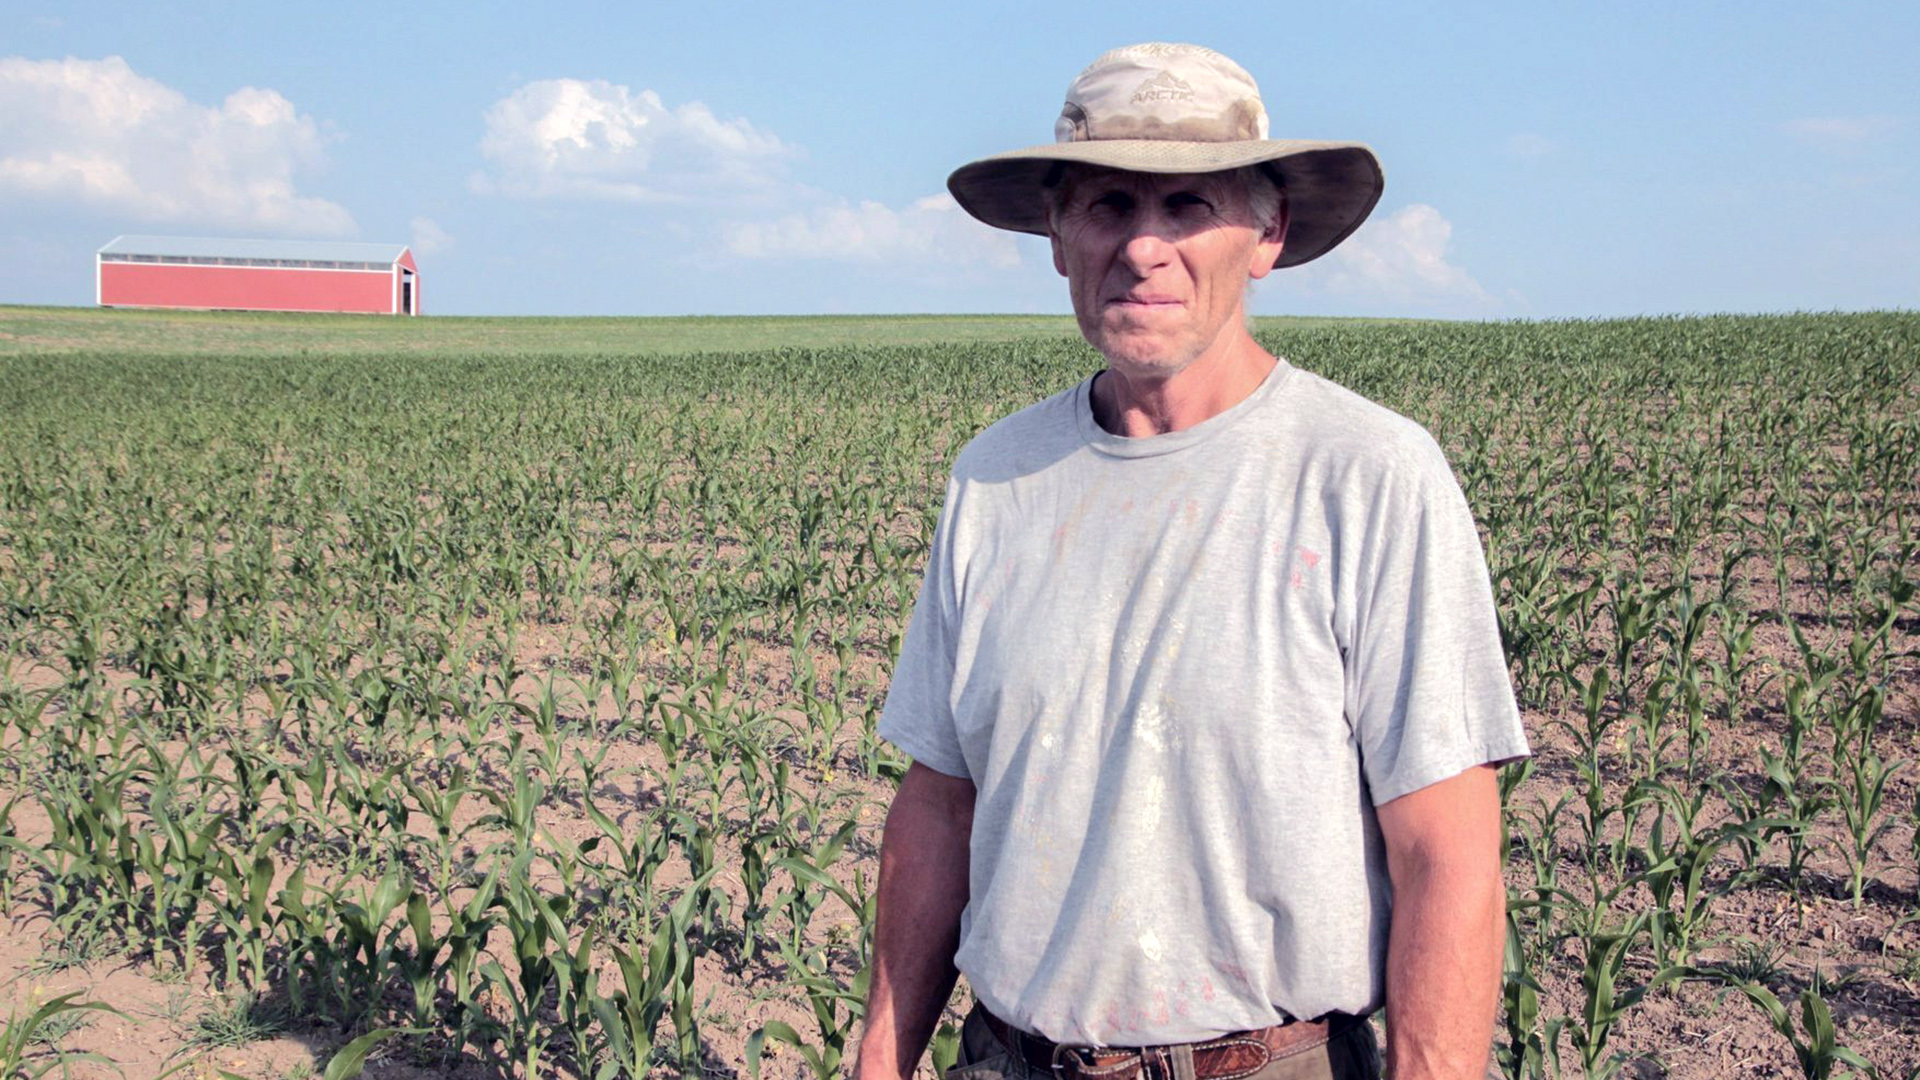 Nick Stanek stands among rows of low crops in a hillside field, with a farm building visible on the horizon.